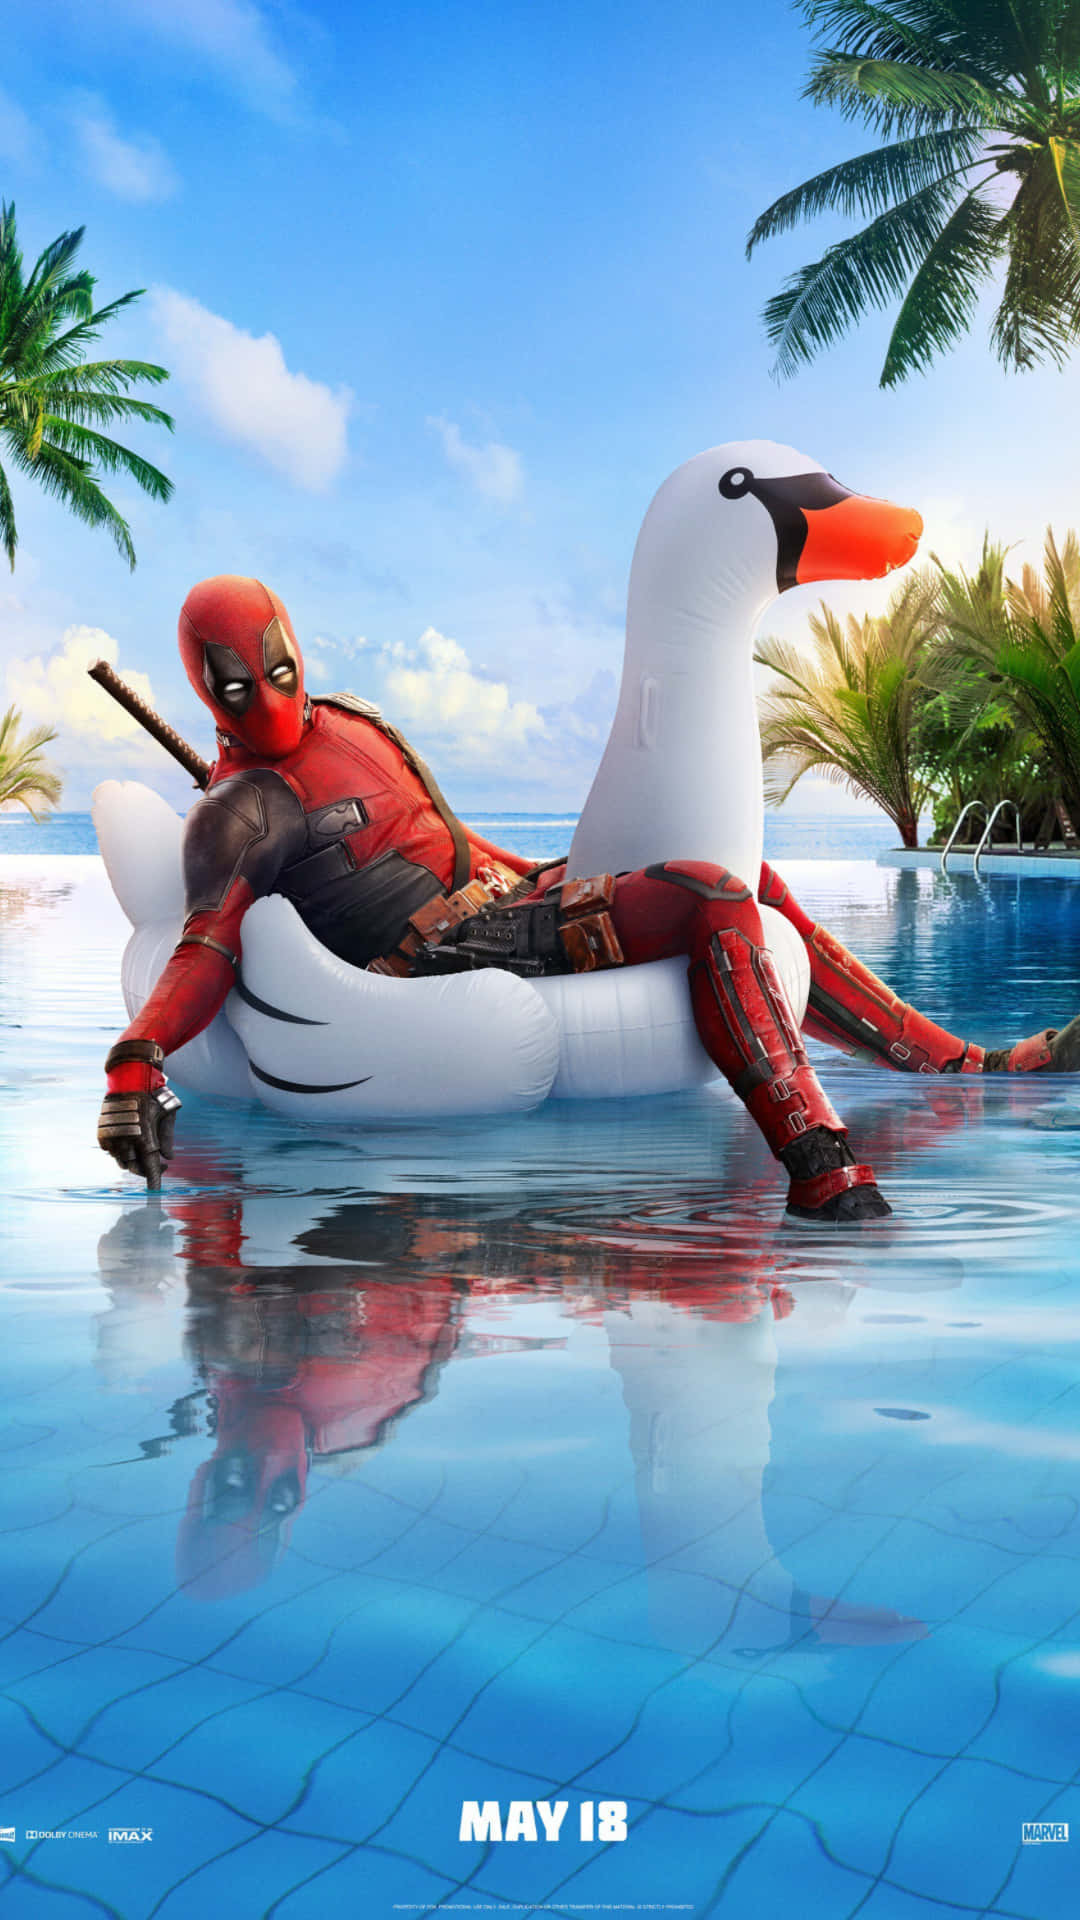 "Stay Stylish with the Deadpool Iphone!" Wallpaper